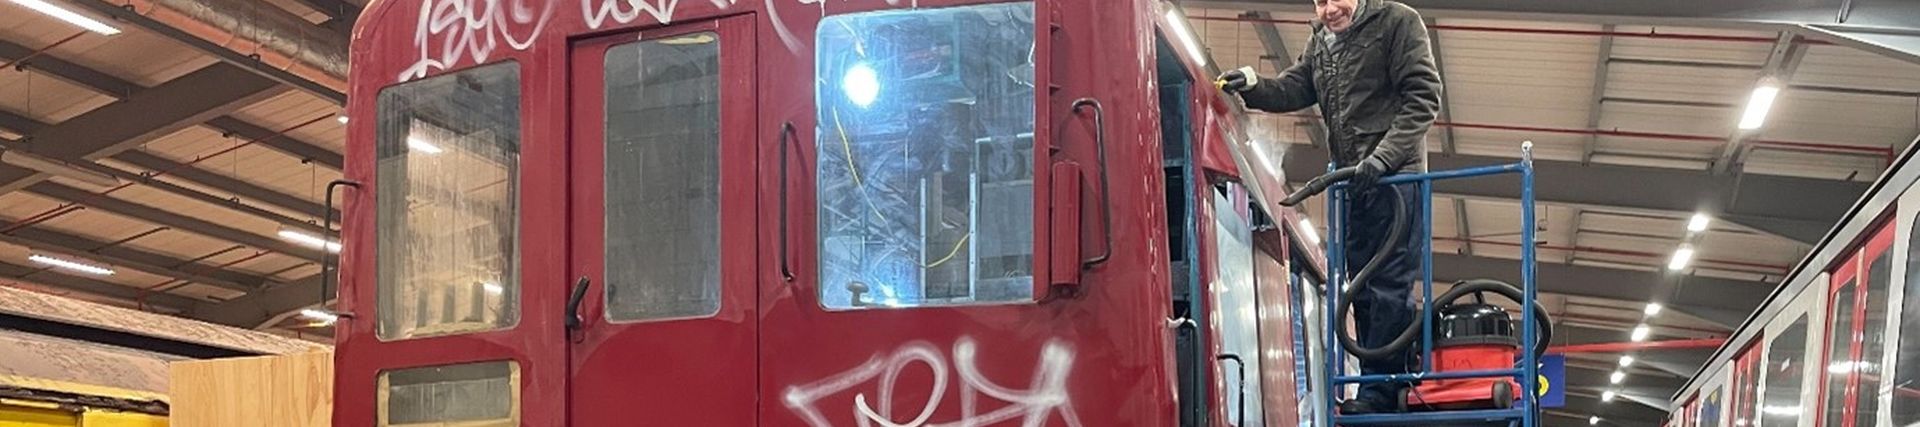 A vintage tube train covered in graffiti 